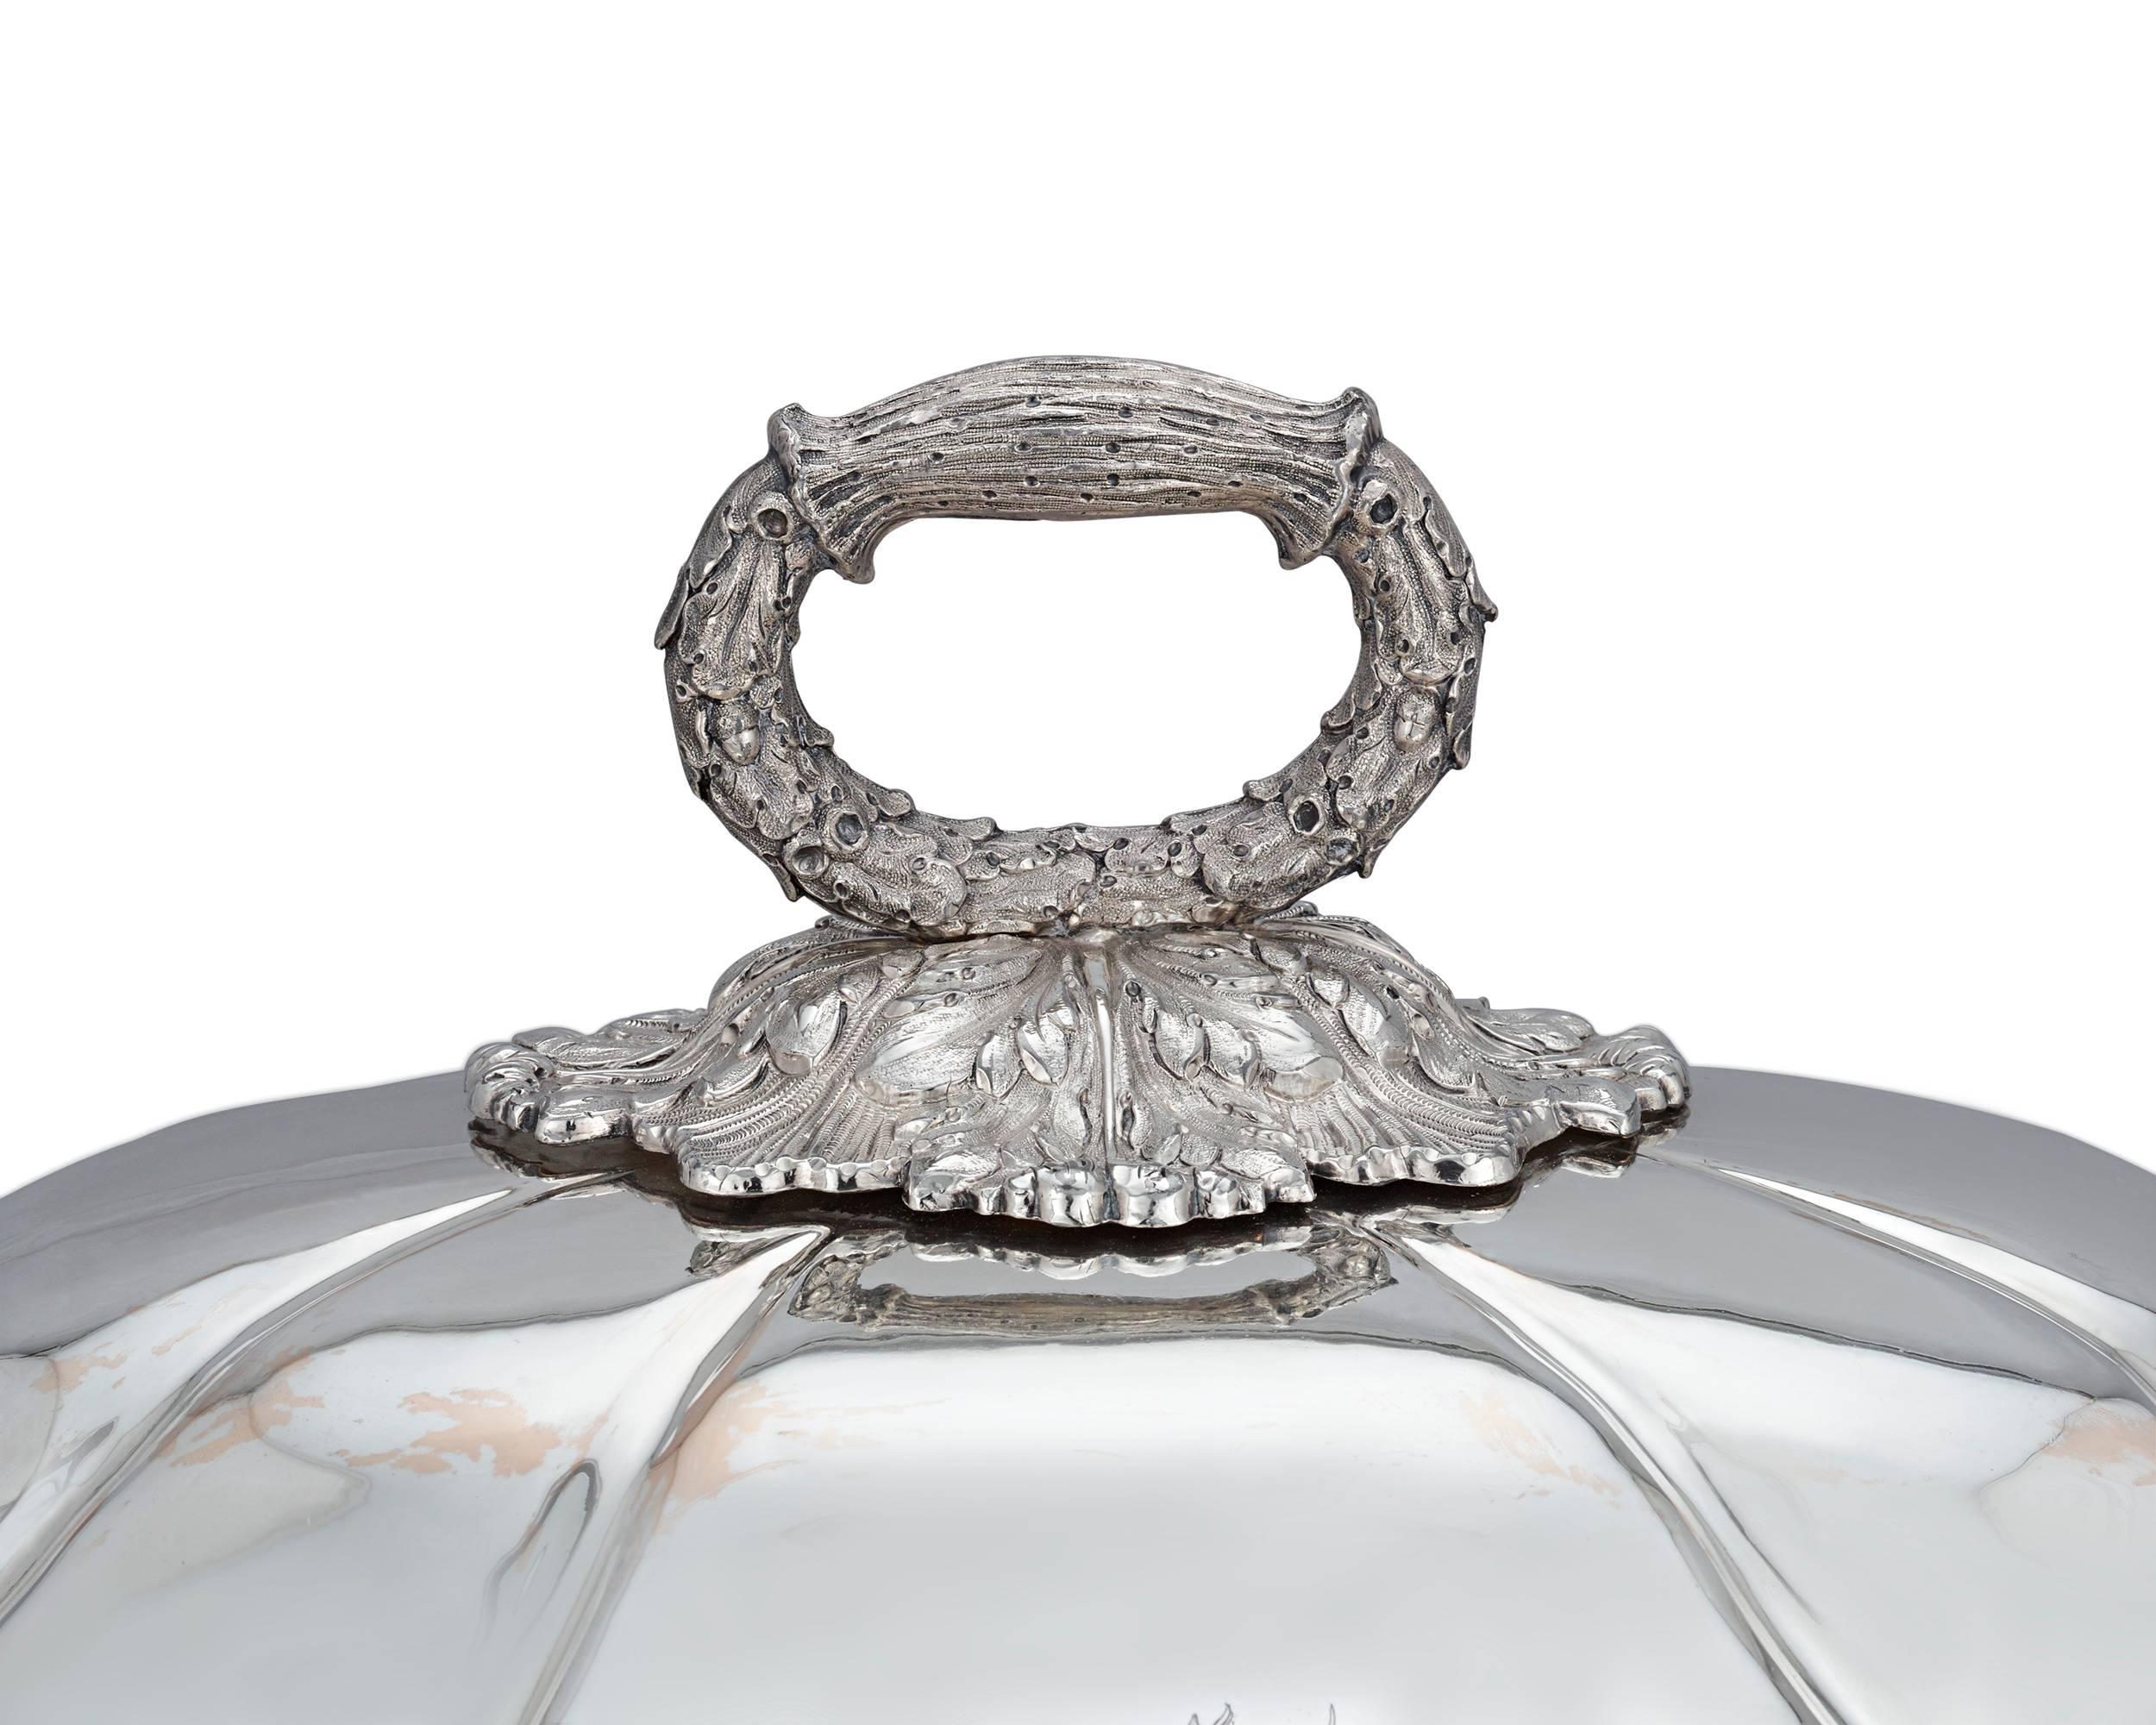 This grand venison meat dish is masterfully crafted of fine Old Sheffield silver plate. A product of Regency ingenuity, this dish is crafted with the utmost intricacy in a manner one would expect from a sterling counterpart. The rich acanthus leaf